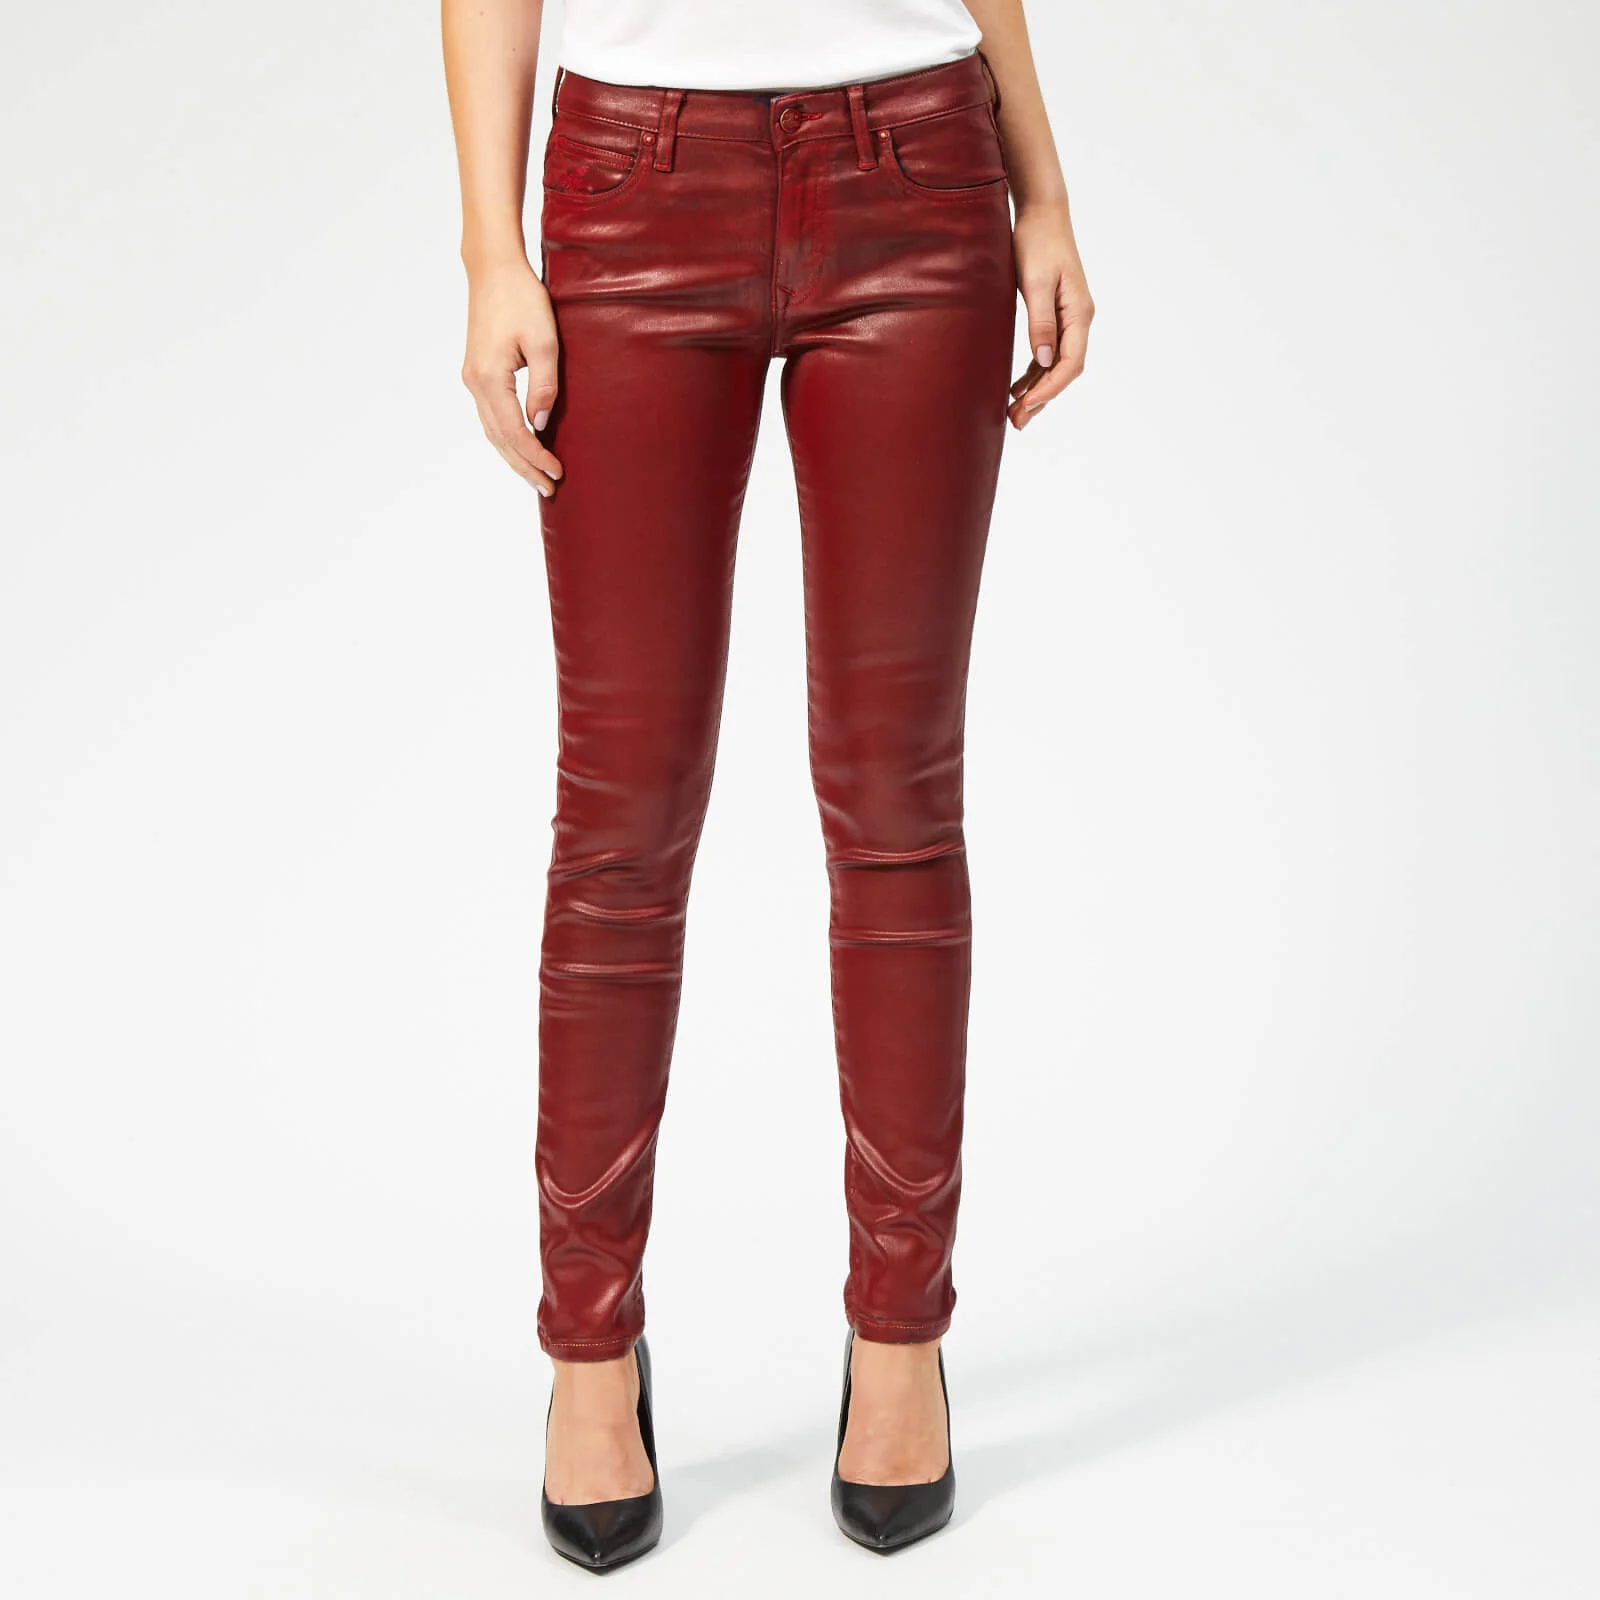 Vivienne Westwood Anglomania Women's Slim Jeans - Red Image 1